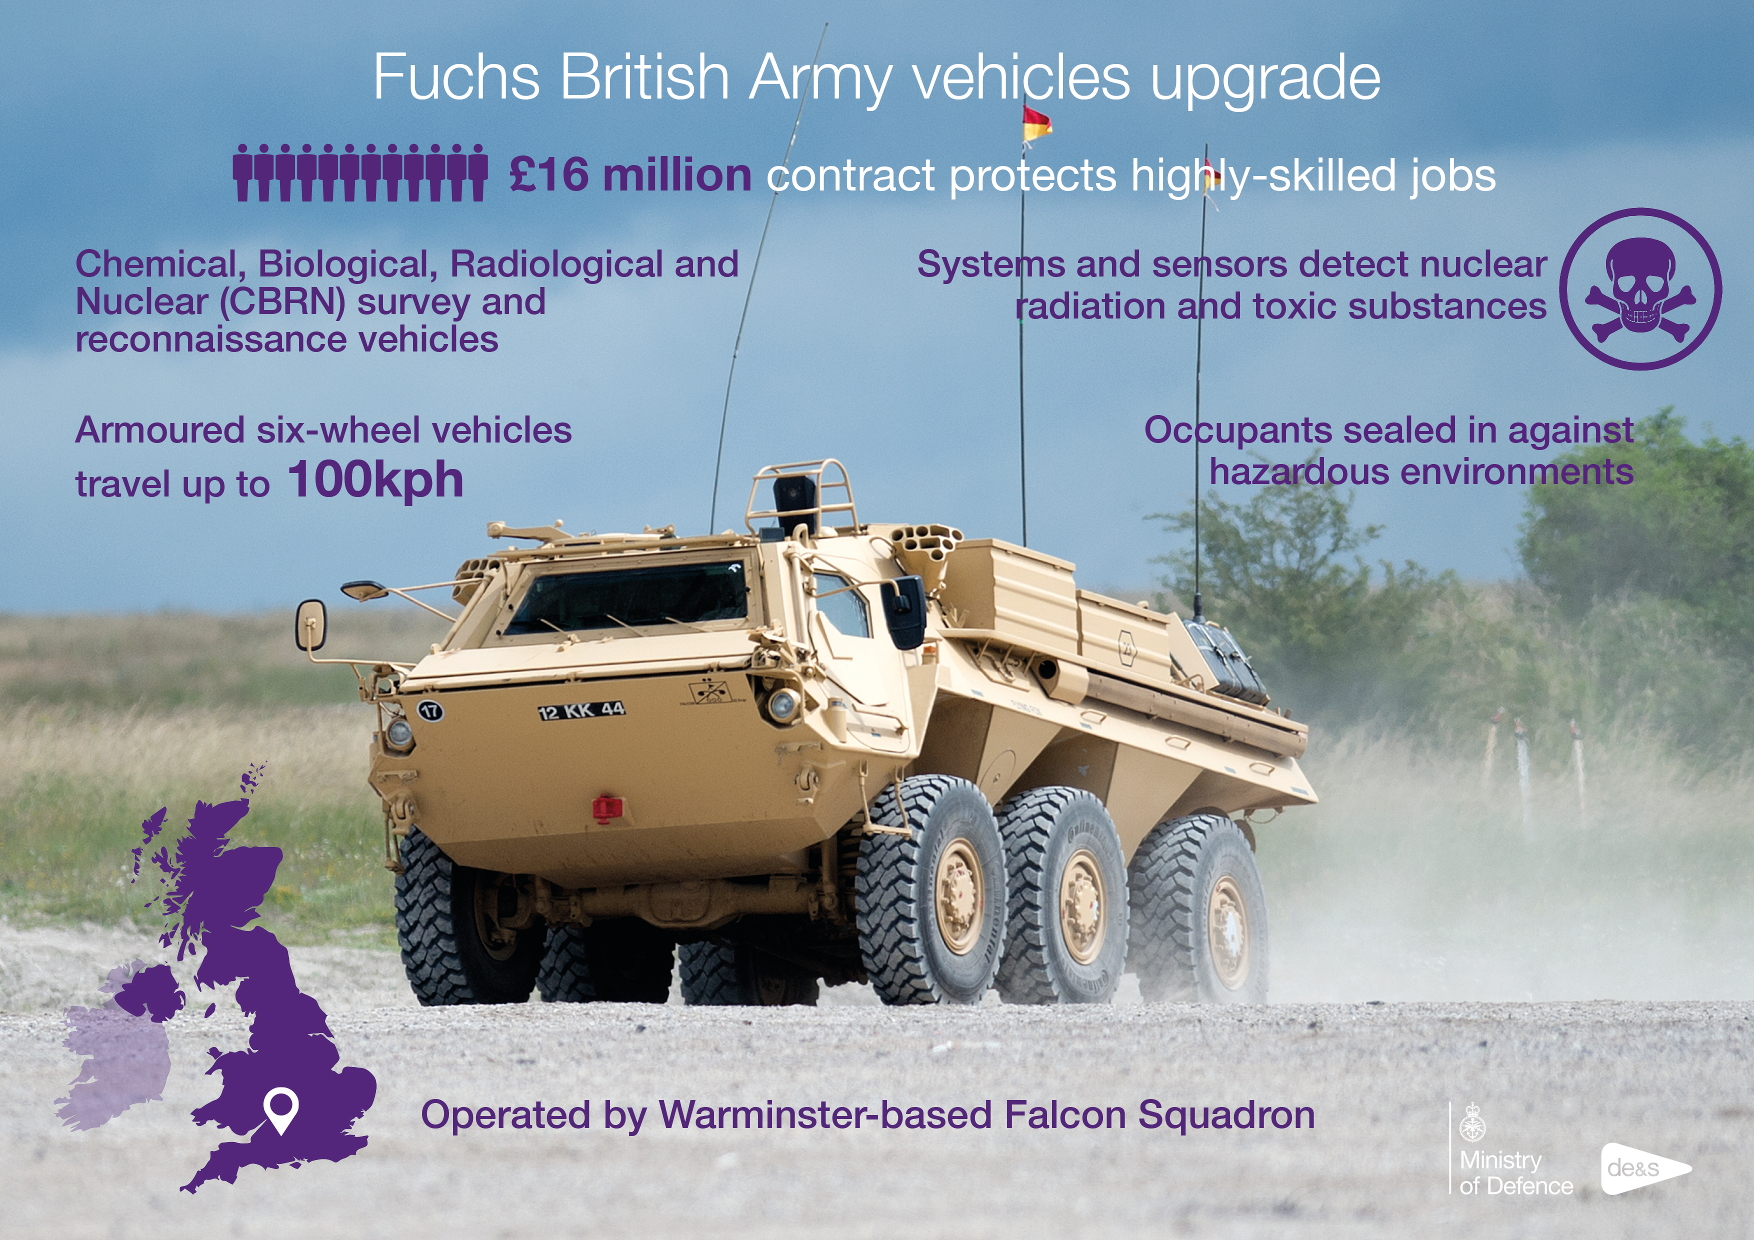 An infographic on the FUCHS armoured vehicle